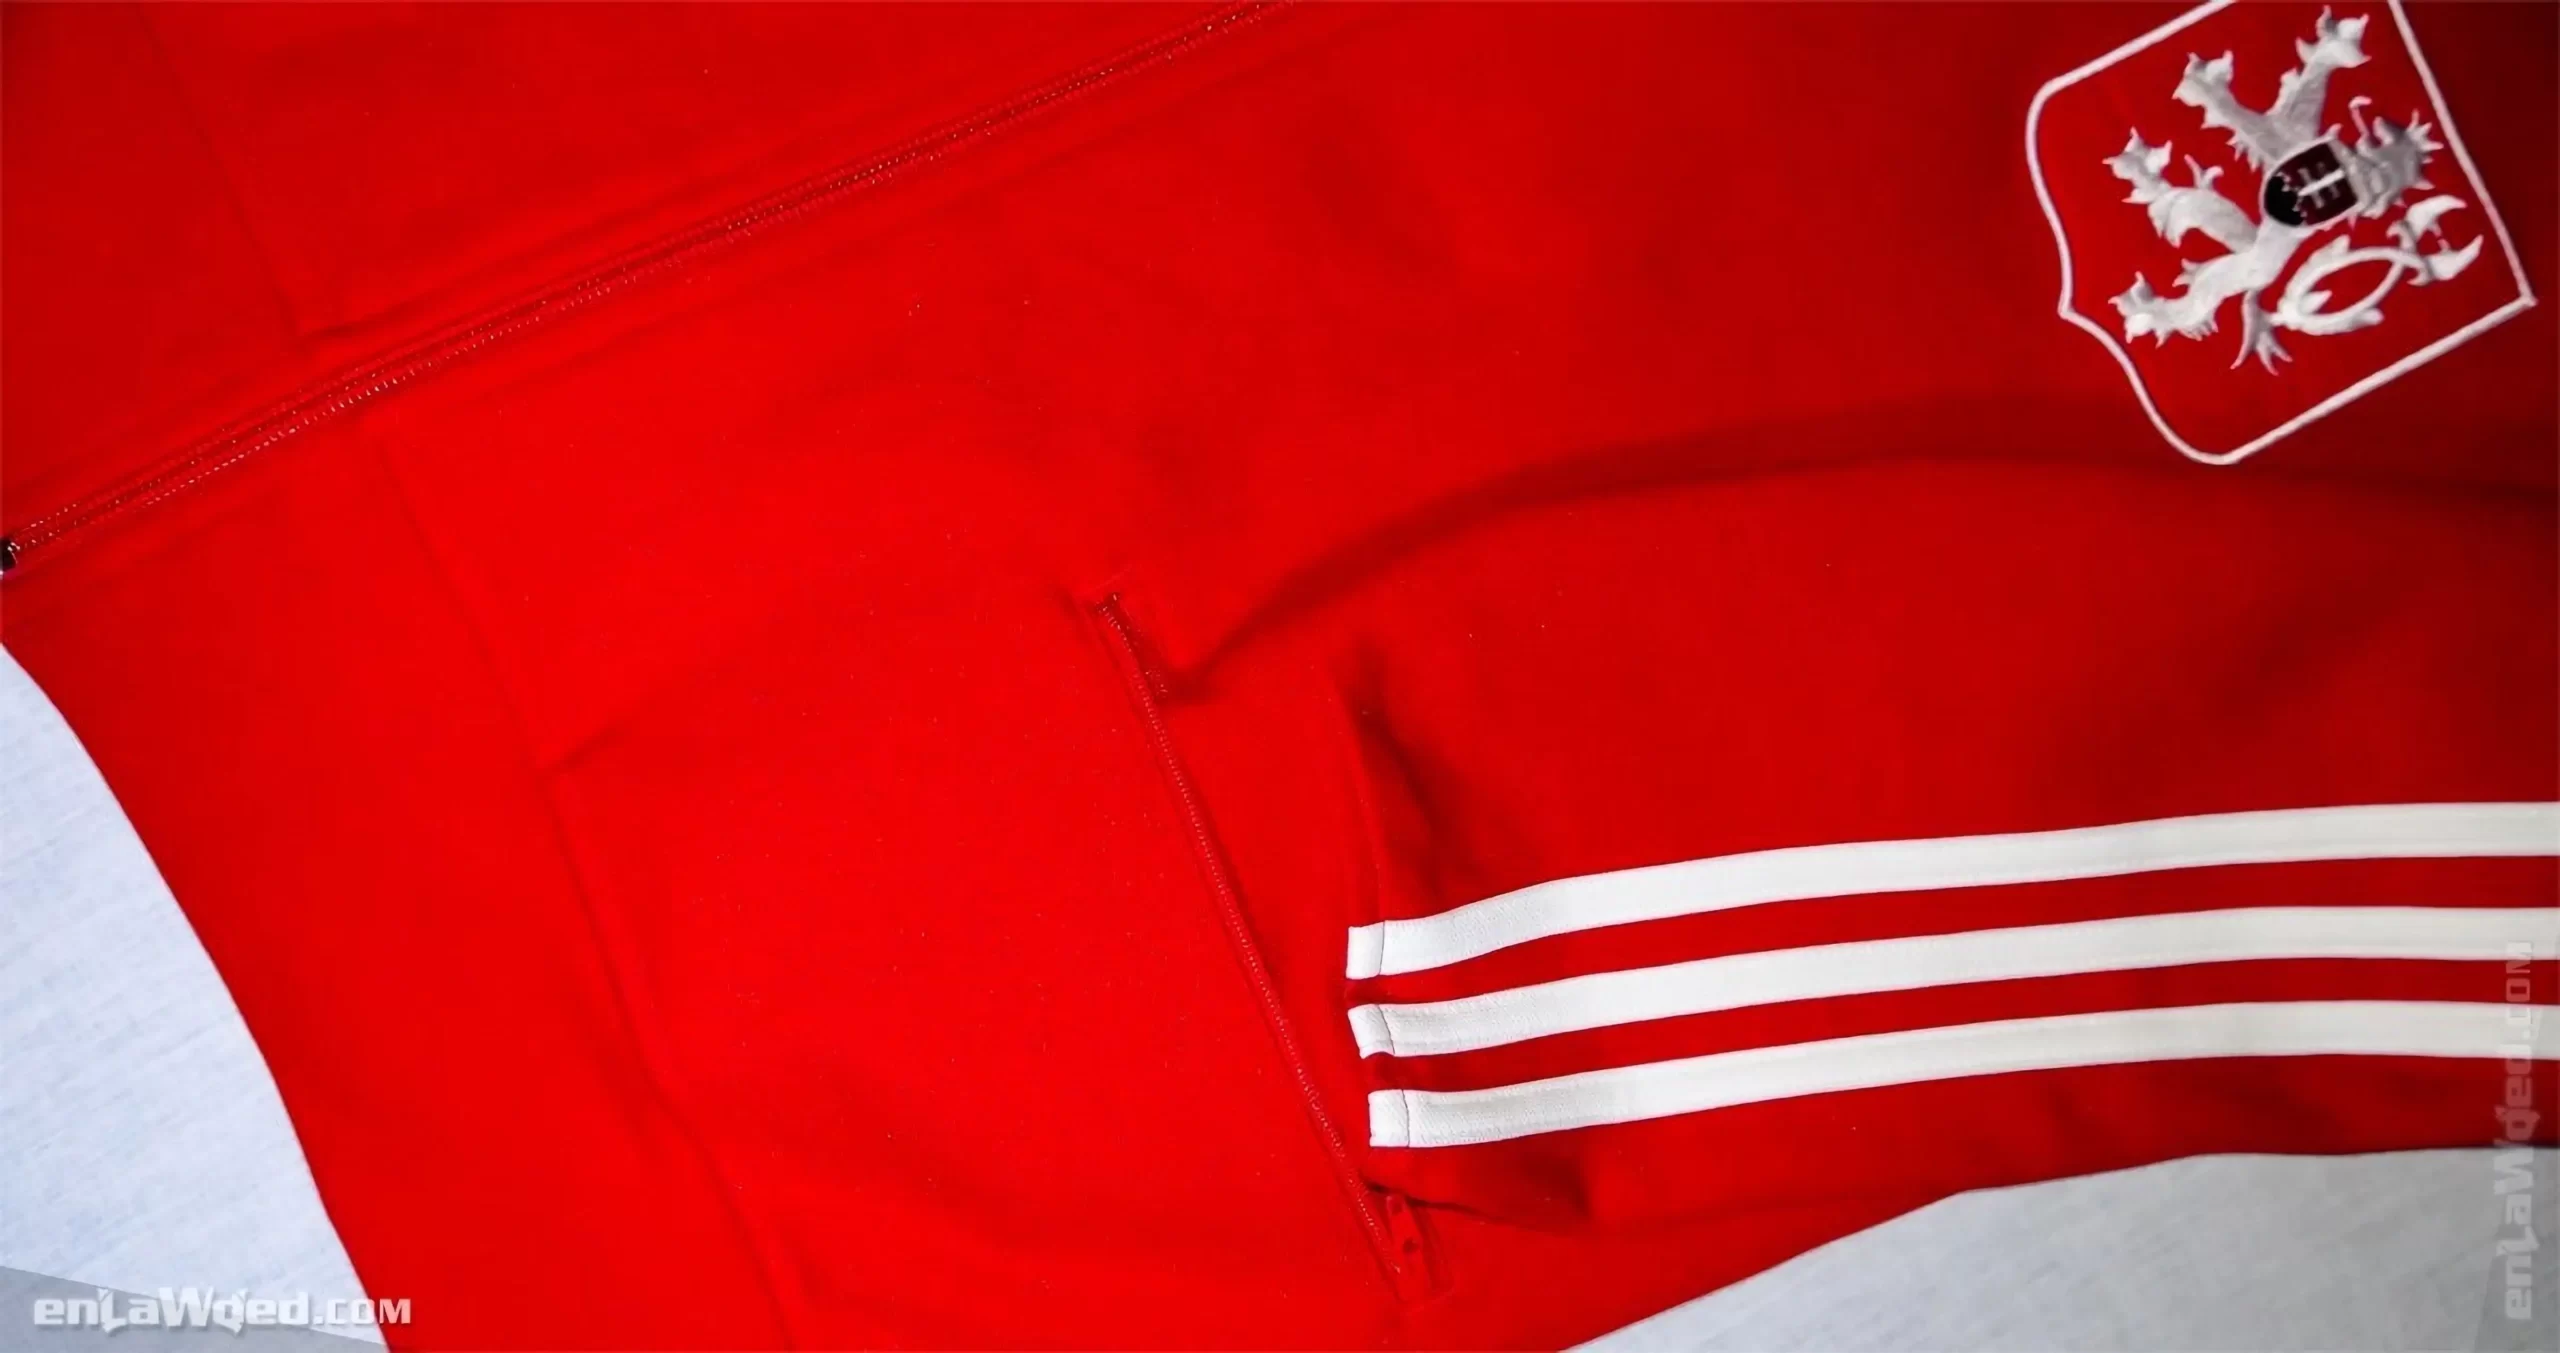 Men’s 2007 Slovakia Love Track Top by Adidas Originals: Uncovered (EnLawded.com file #lmcgfgwgoxzht92oci)